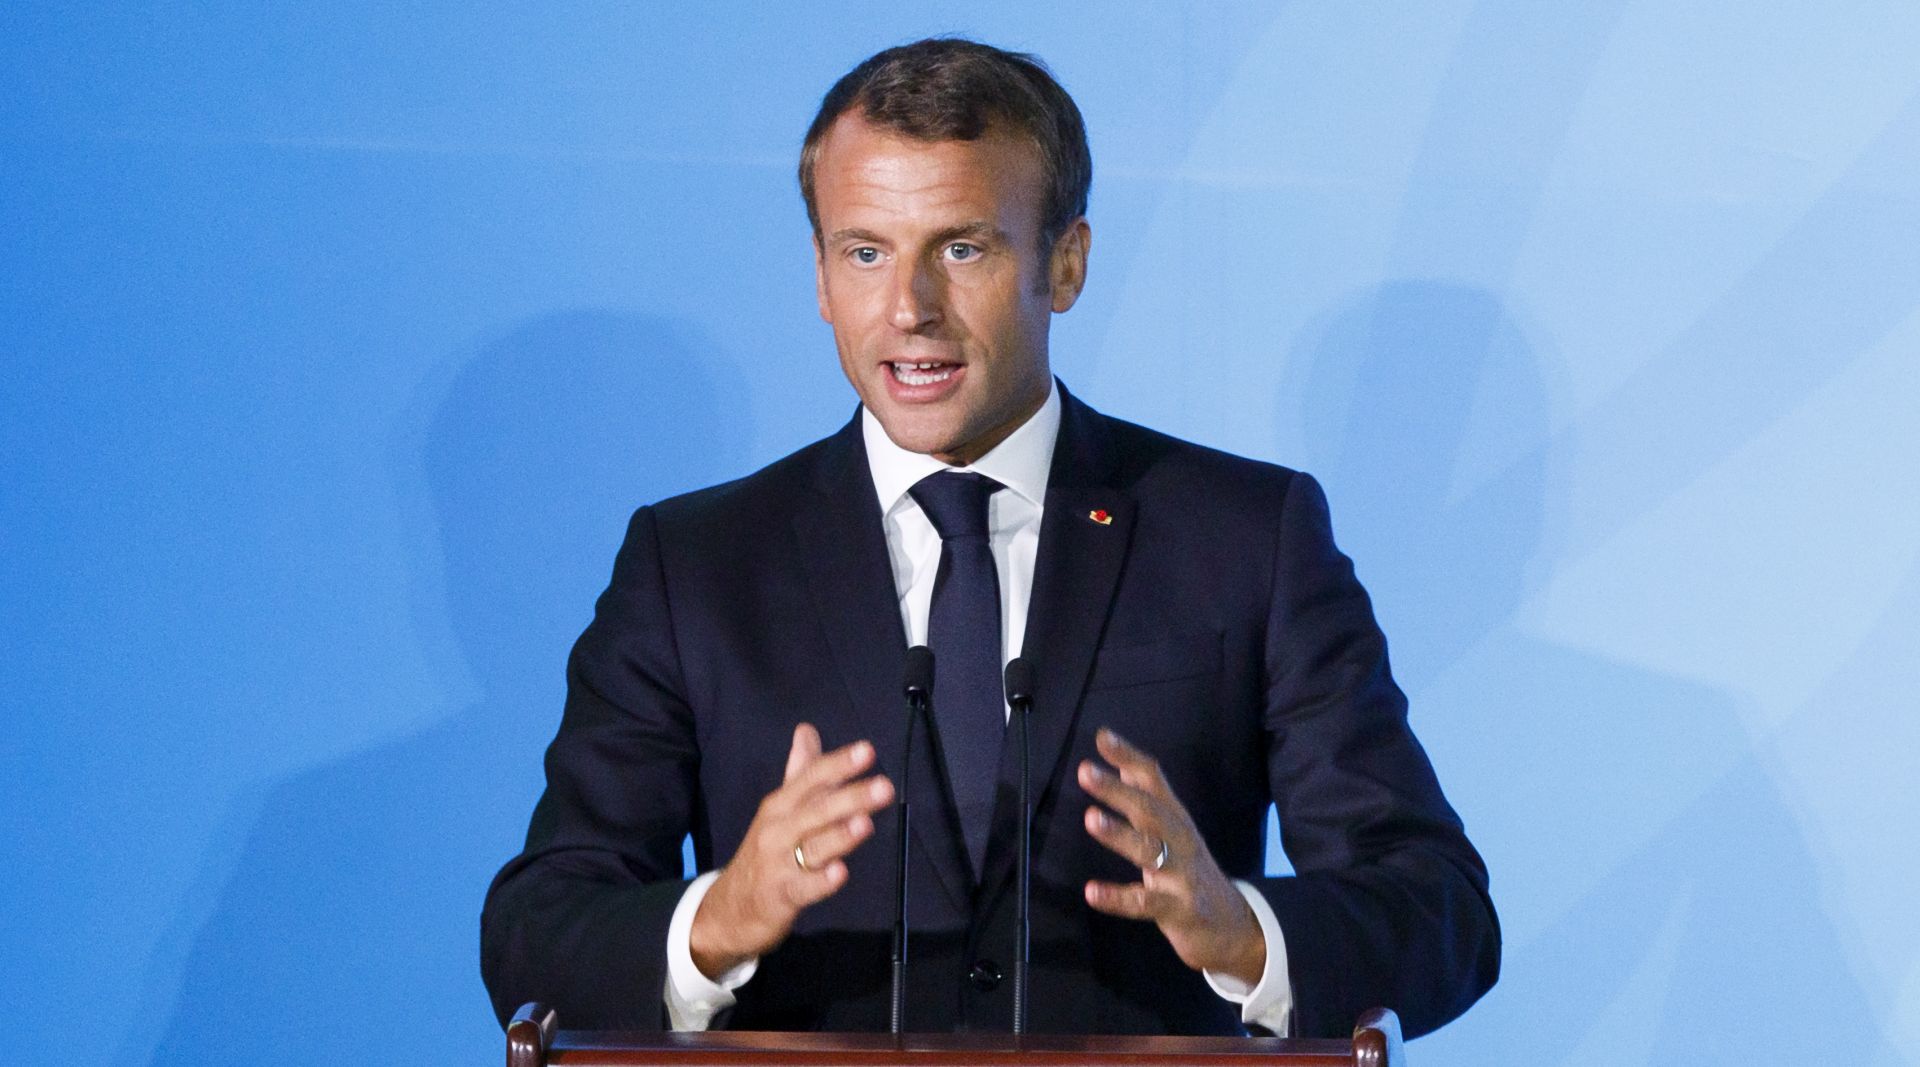 epa07864361 President of France Emmanuel Macron speaks during the 2019 Climate Action Summit which is being held ahead of the General Debate of the General Assembly of the United Nations at United Nations Headquarters in New York, New York, USA, 23 September 2019. World Leaders have been invited to speak at the event, which was organized by the United Nations Secretary-General Antonio Guterres, for the purpose of proposing plans for addressing global climate change. The General Debate of the 74th session of the UN General Assembly begins on 24 September.  EPA/JUSTIN LANE